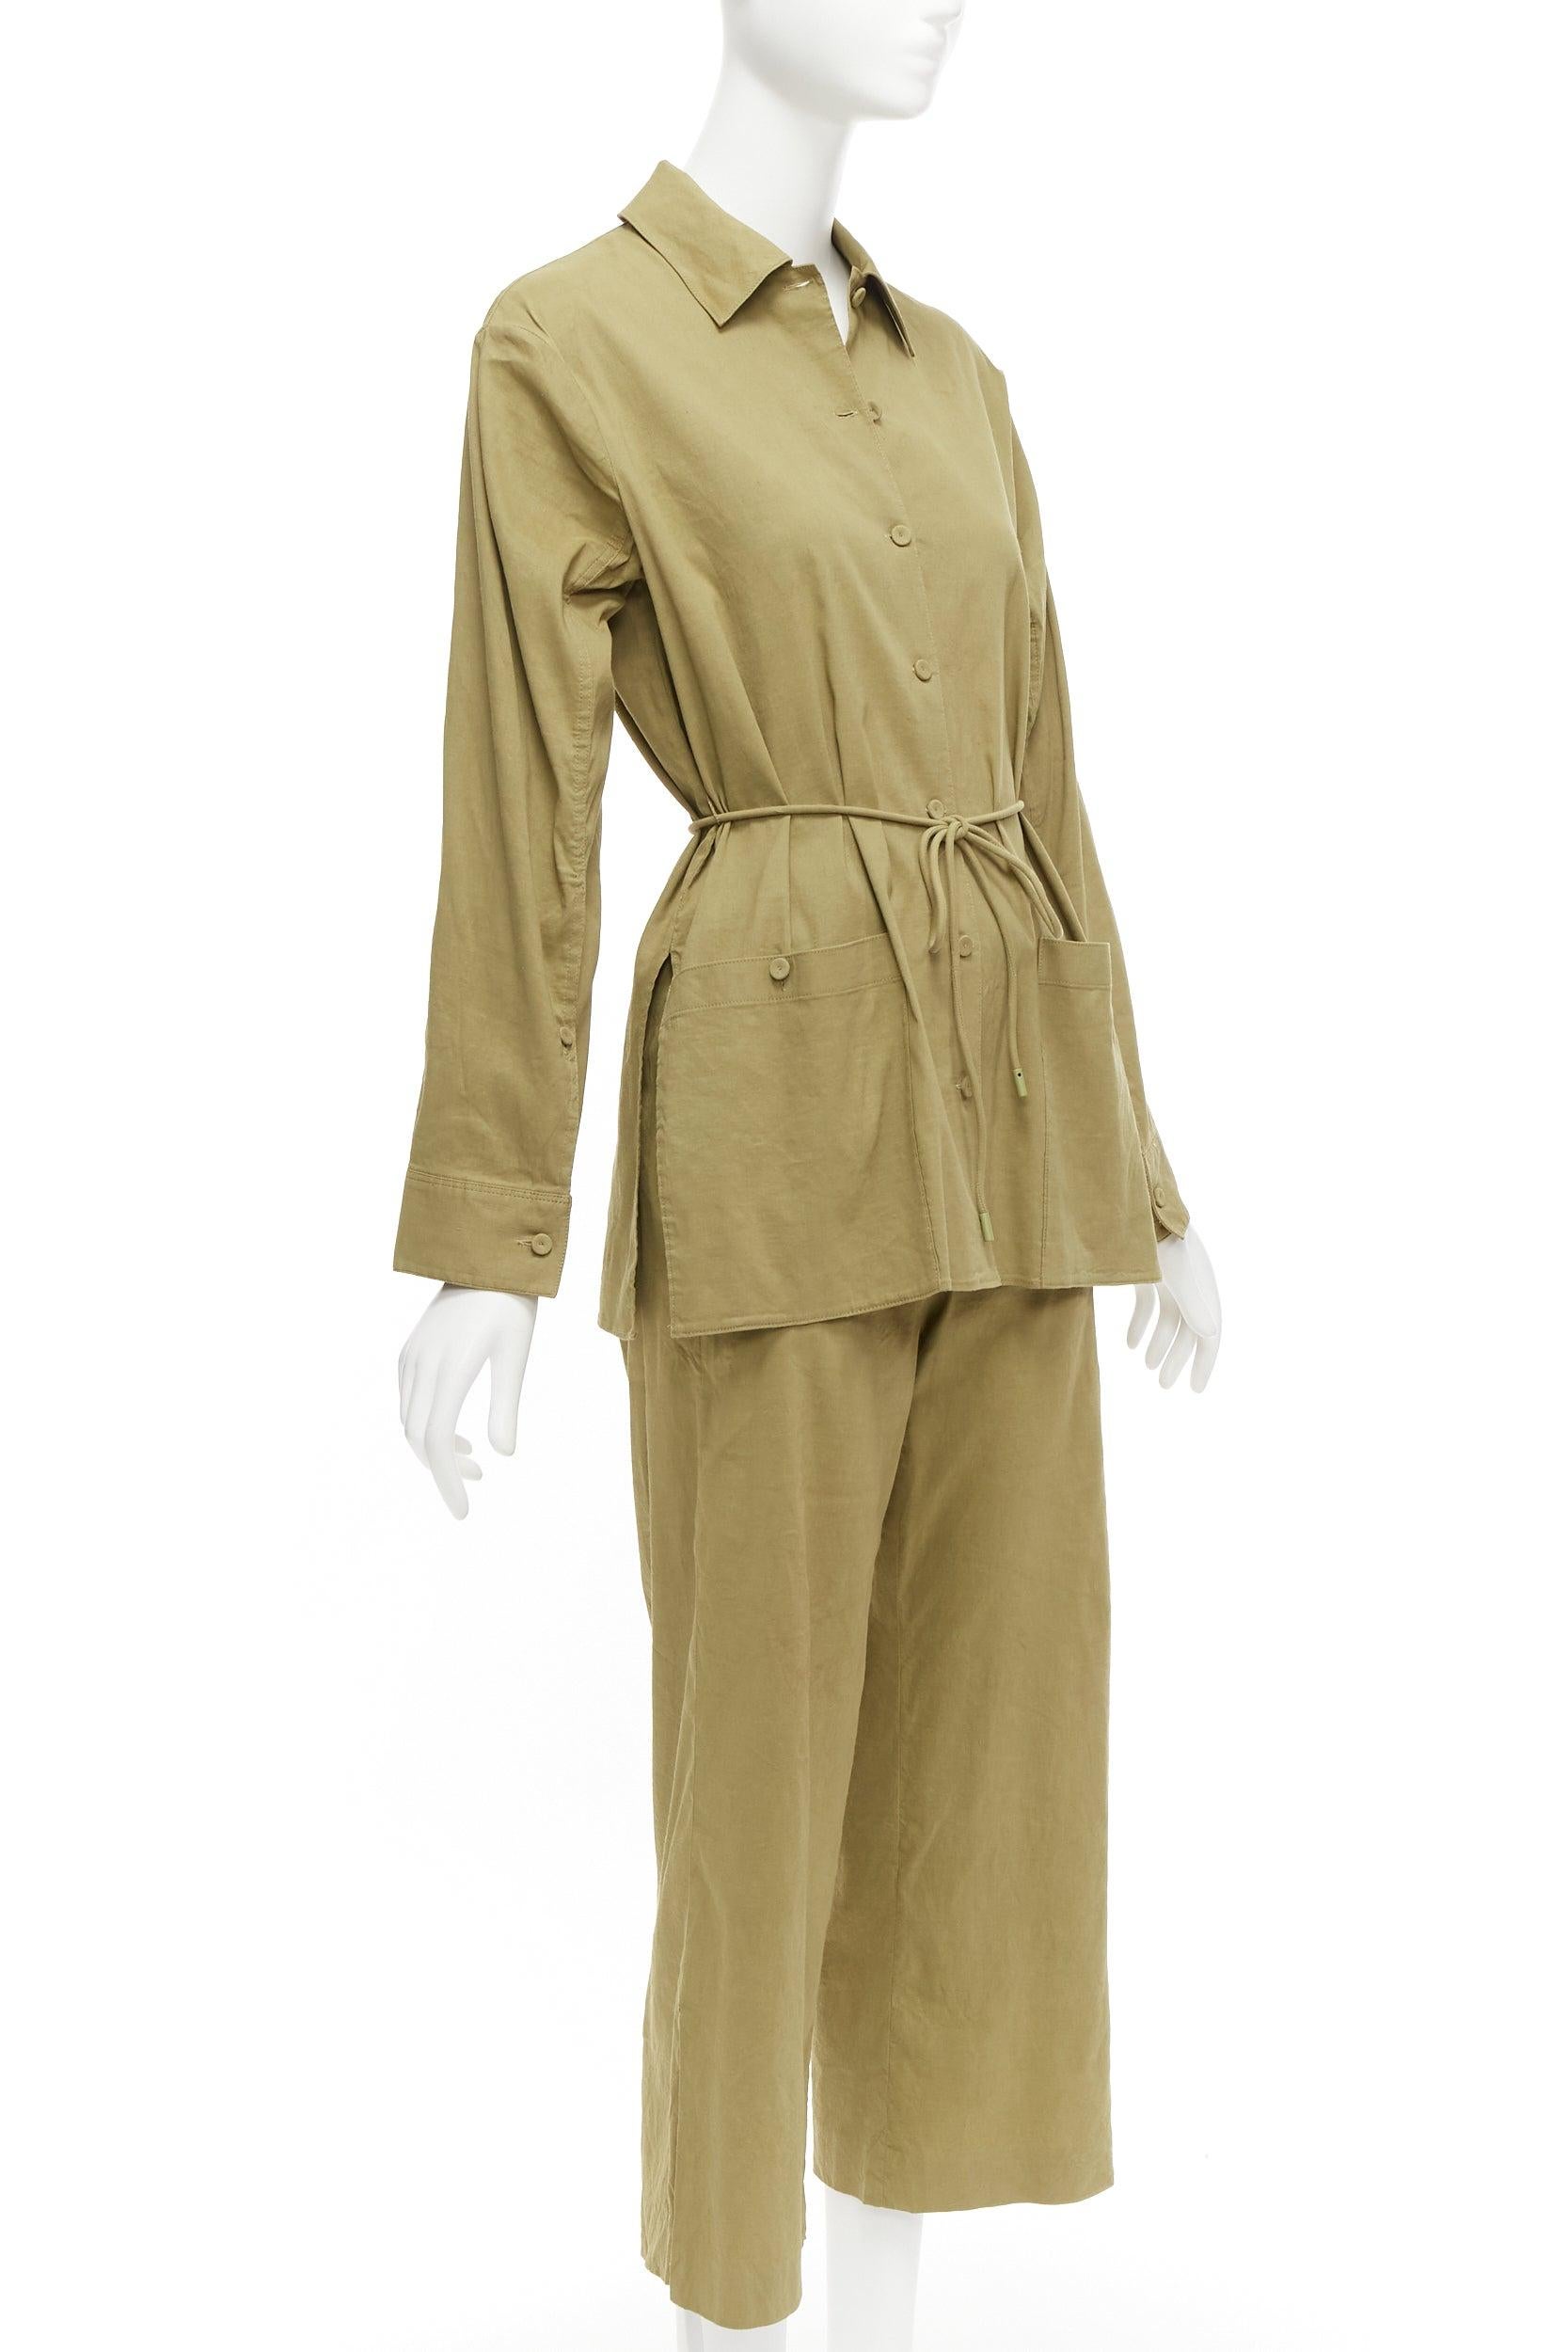 THEORY olive green linen blend tie belt relaxed jacket wide leg pants set US0 XS
Reference: JACG/A00147
Brand: Theory
Material: Linen, Blend
Color: Green
Pattern: Solid
Closure: Belt
Extra Details: Fabric wrap buttons.
Made in: